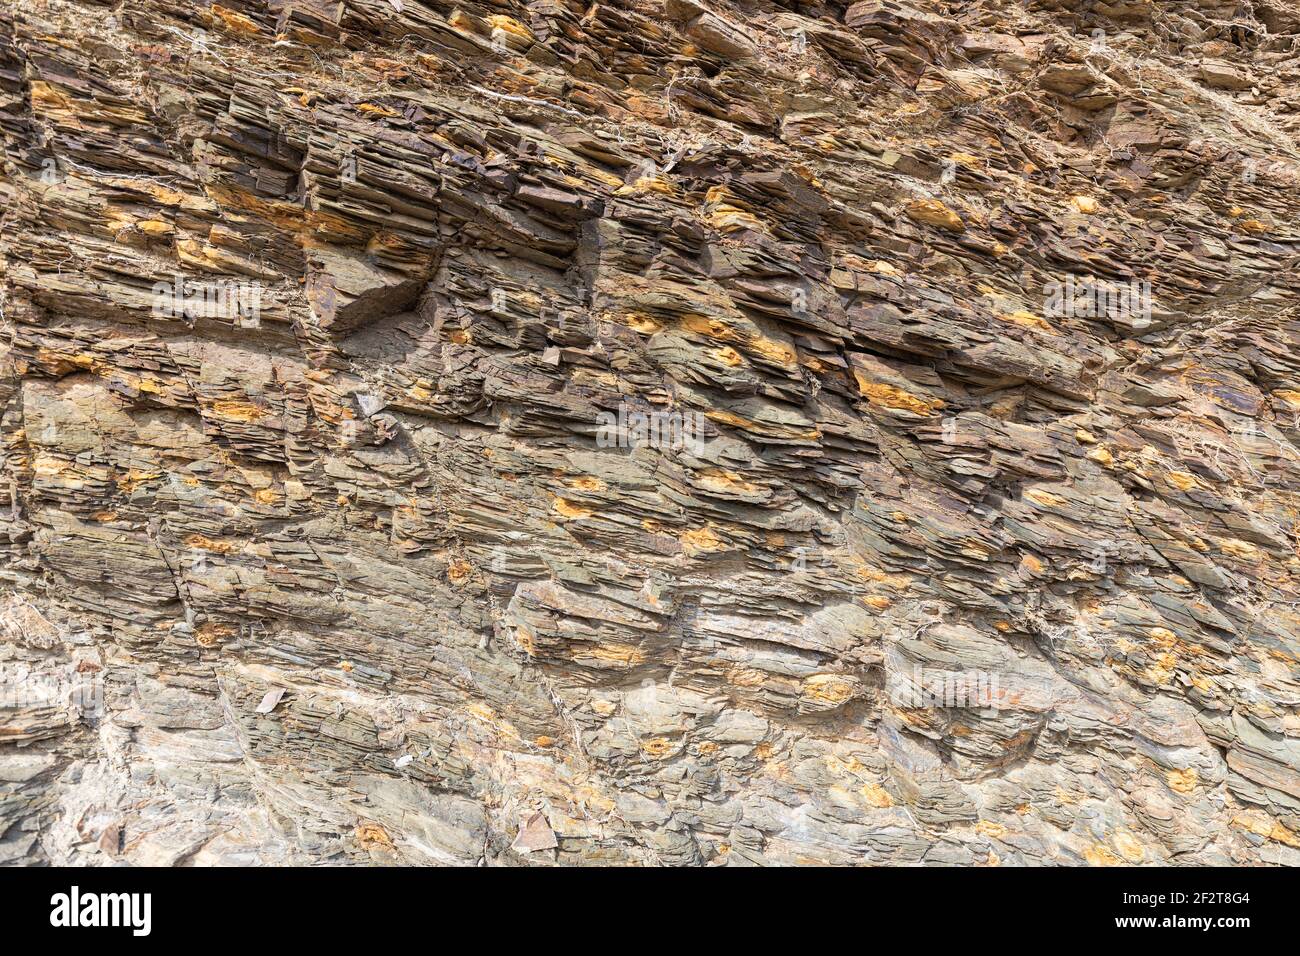 Natural volcanic stone texture. Rock texture and background. Stock Photo